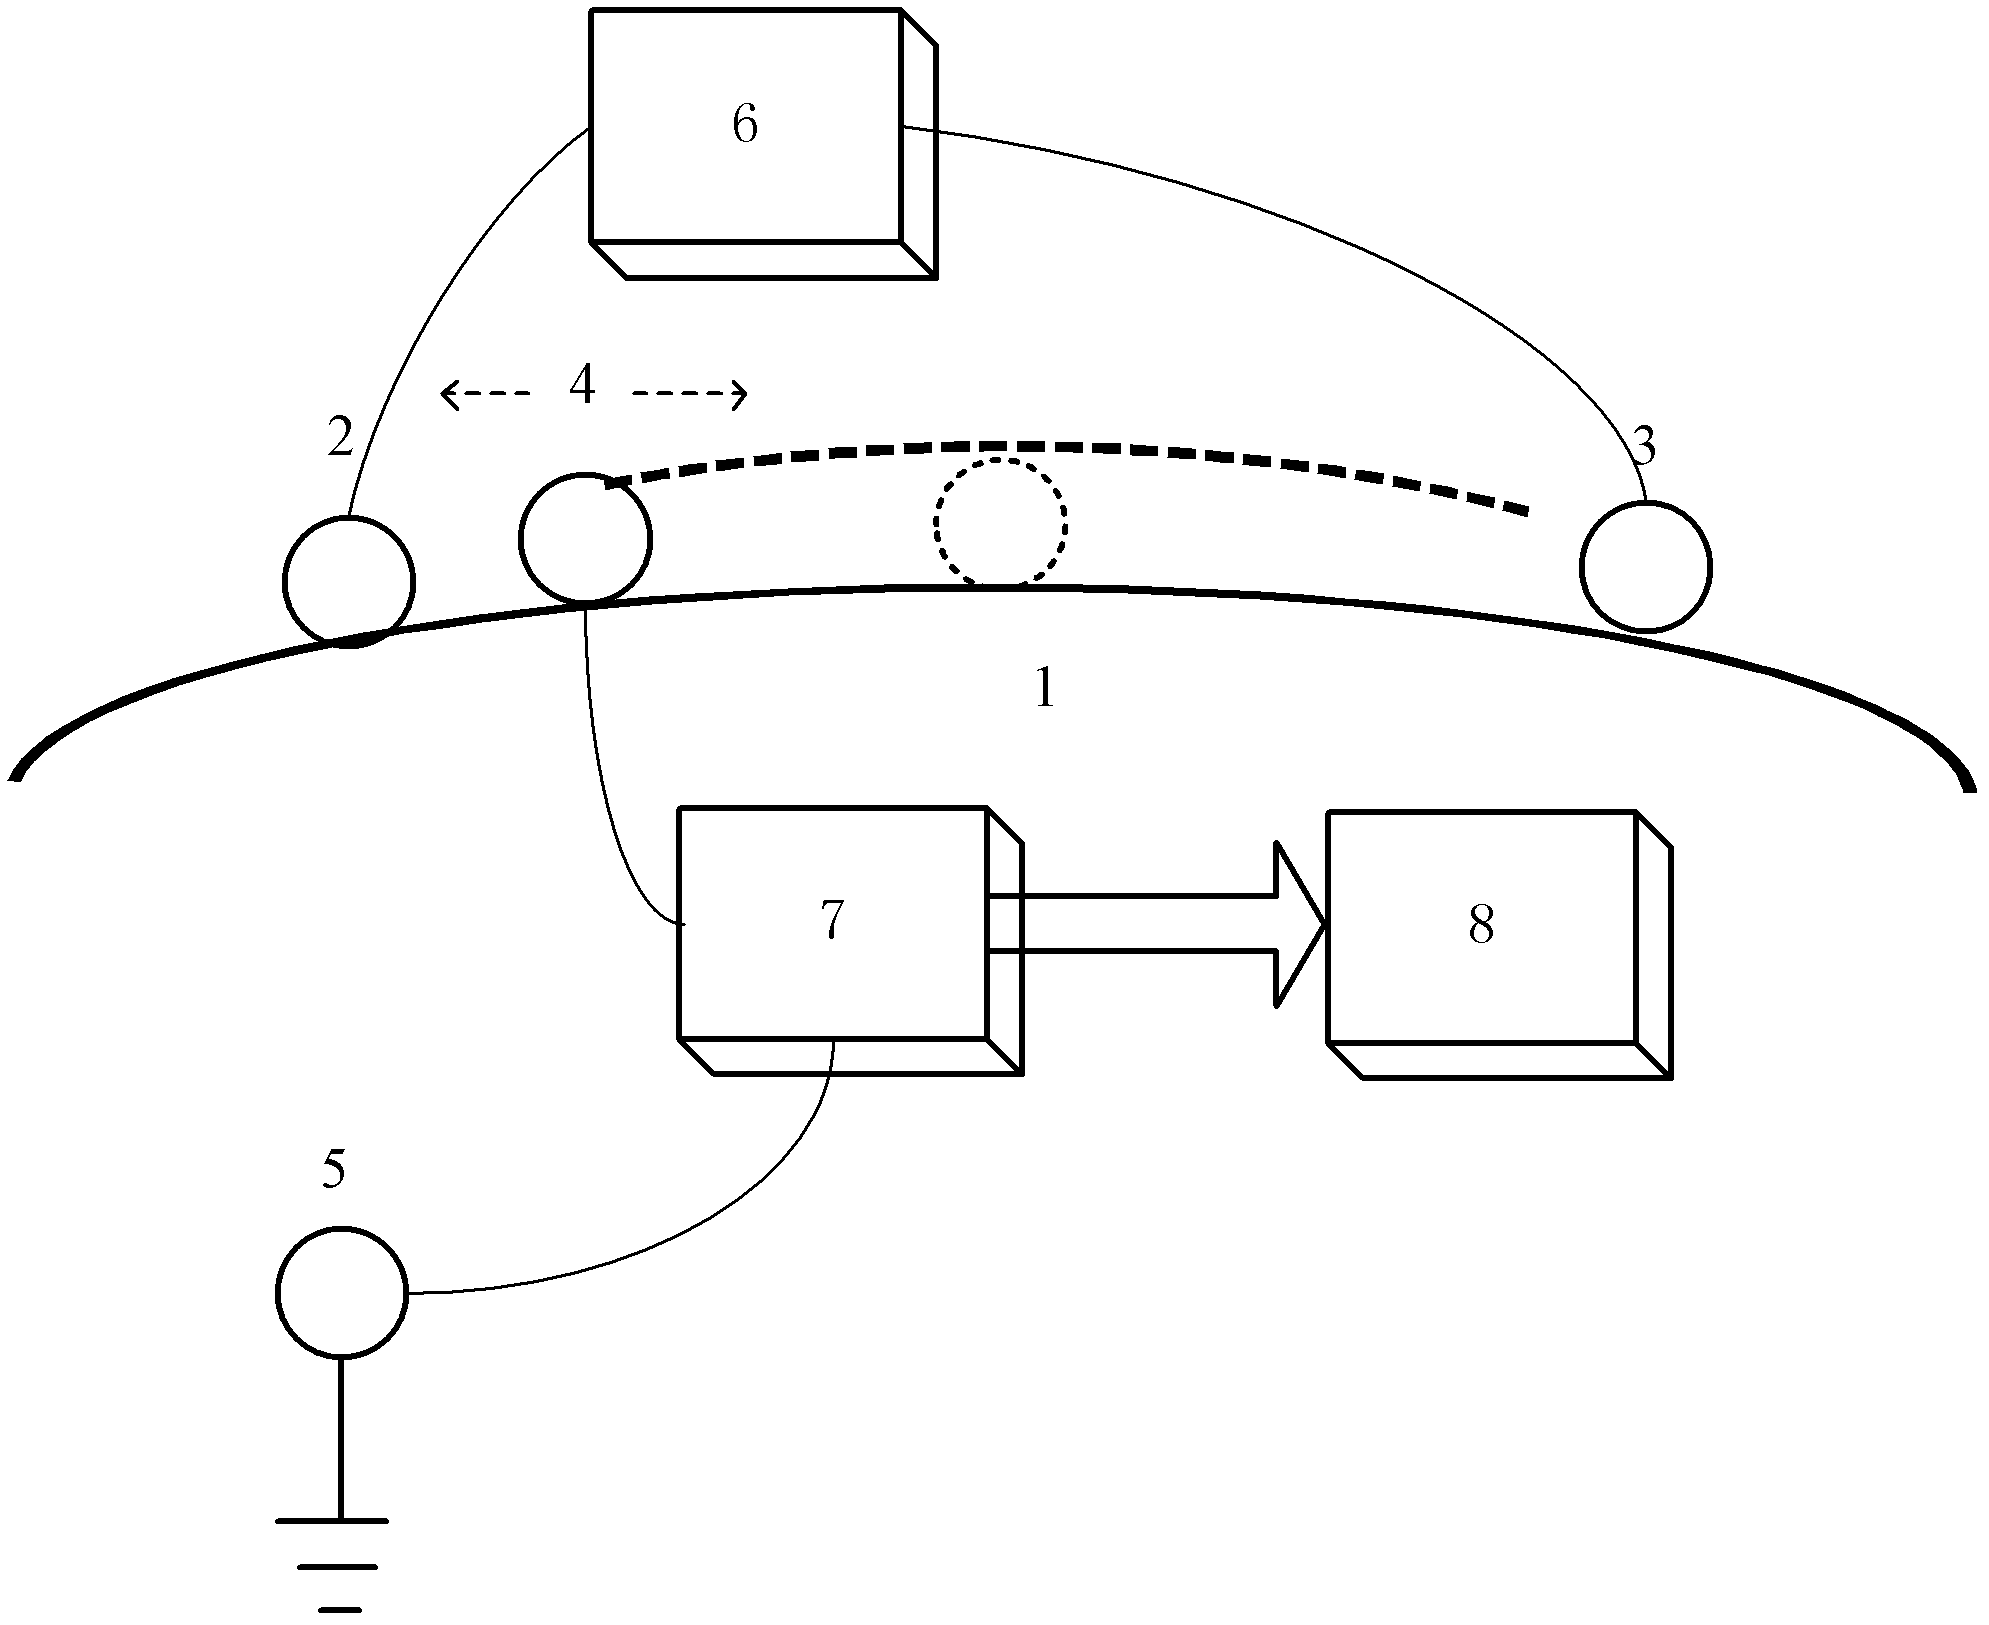 Electric impedance imaging system with open electrode scanning mode